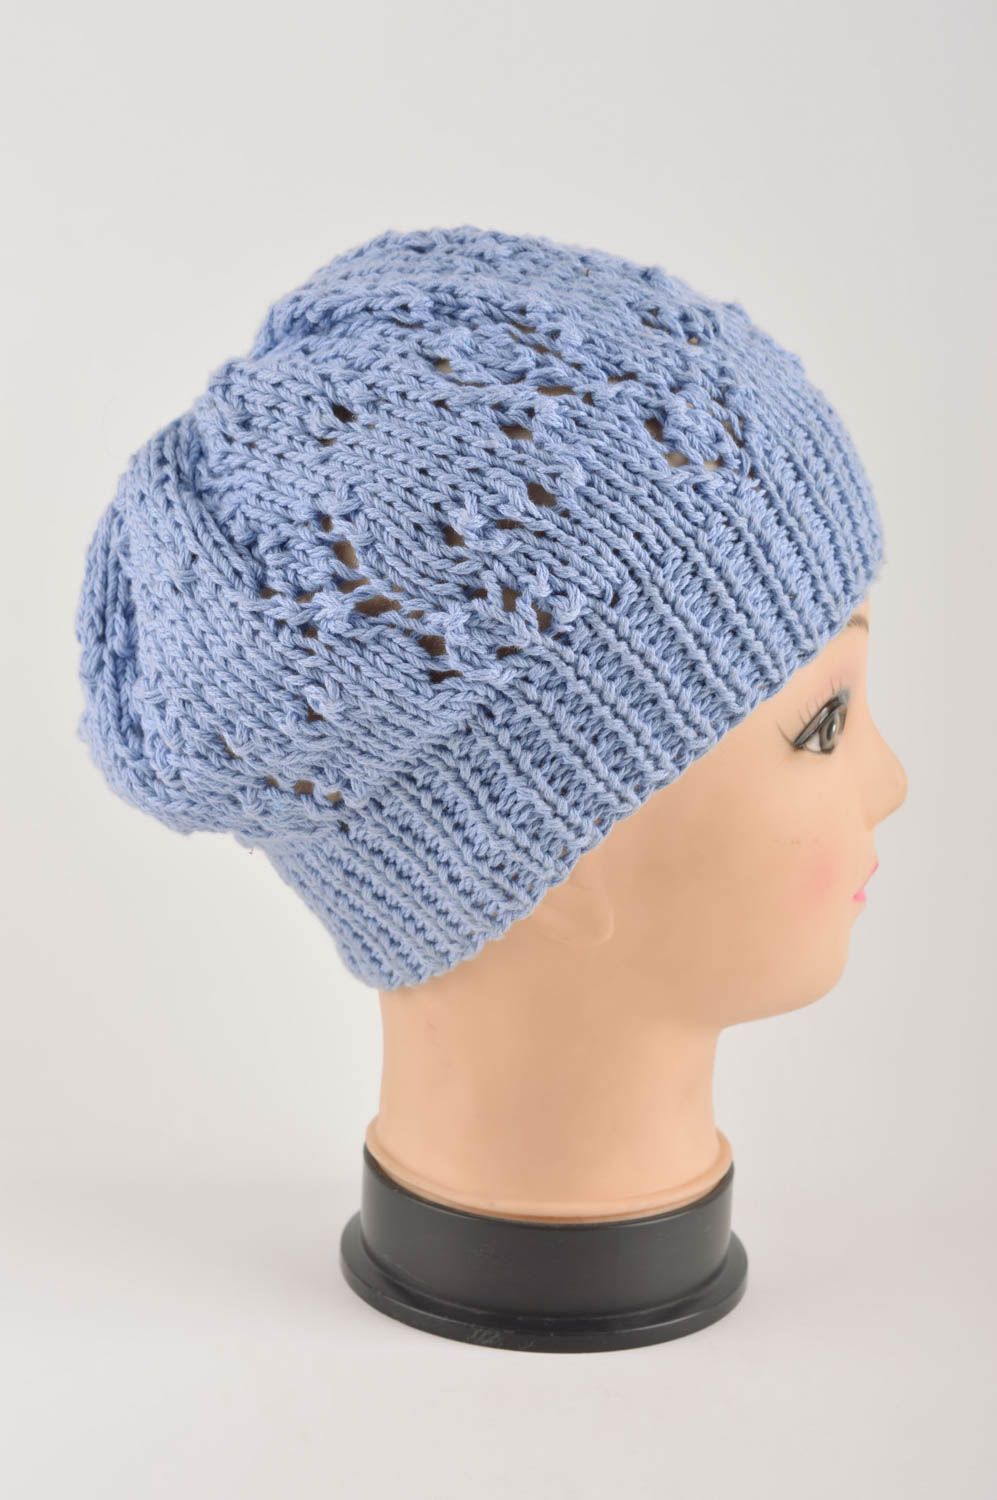 Handmade ladies hat knitted hat designer accessories fashion hats gifts for her photo 4